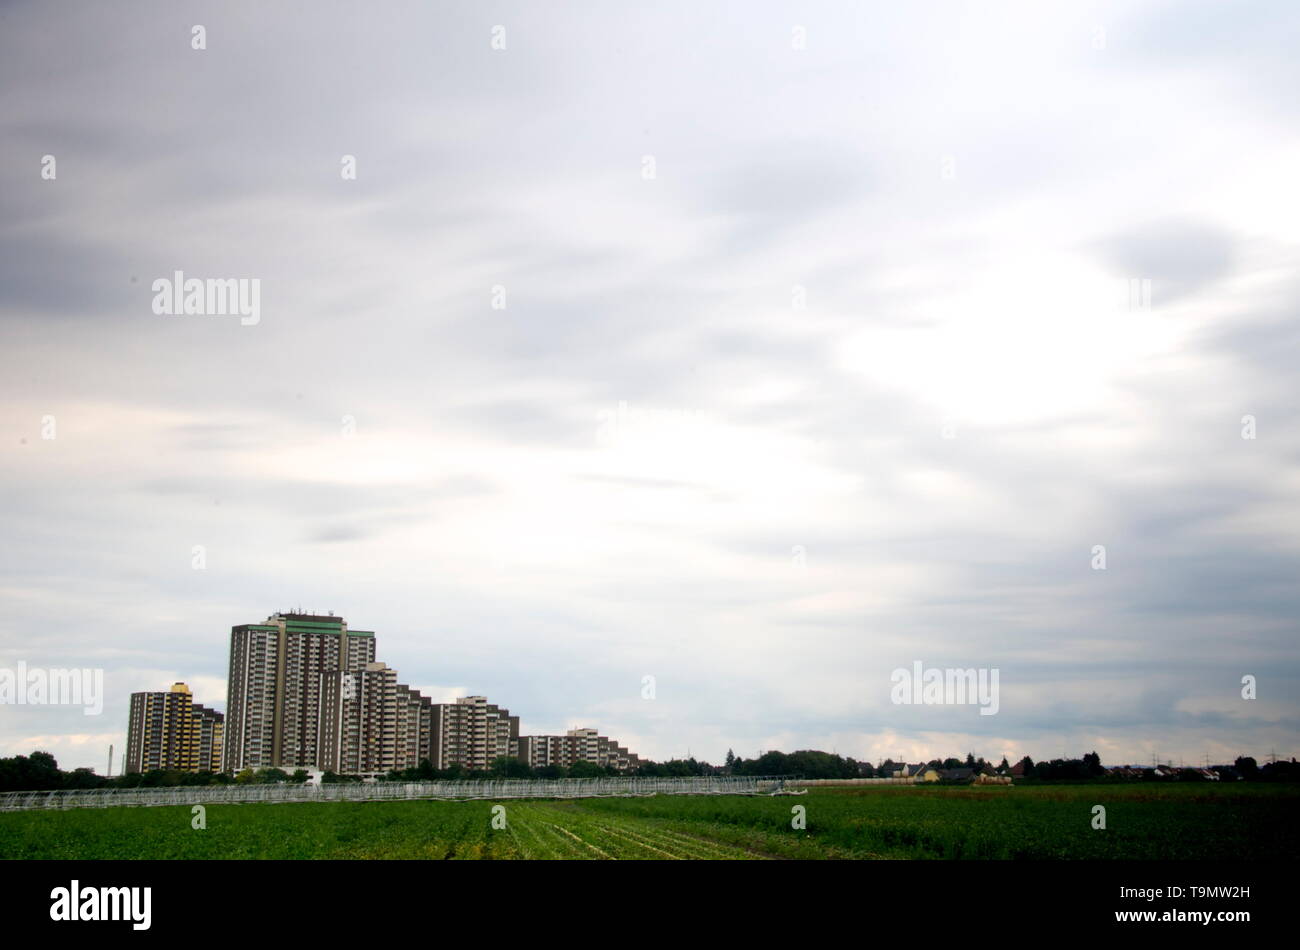 highrise housing estate in Cologne, Germany Stock Photo